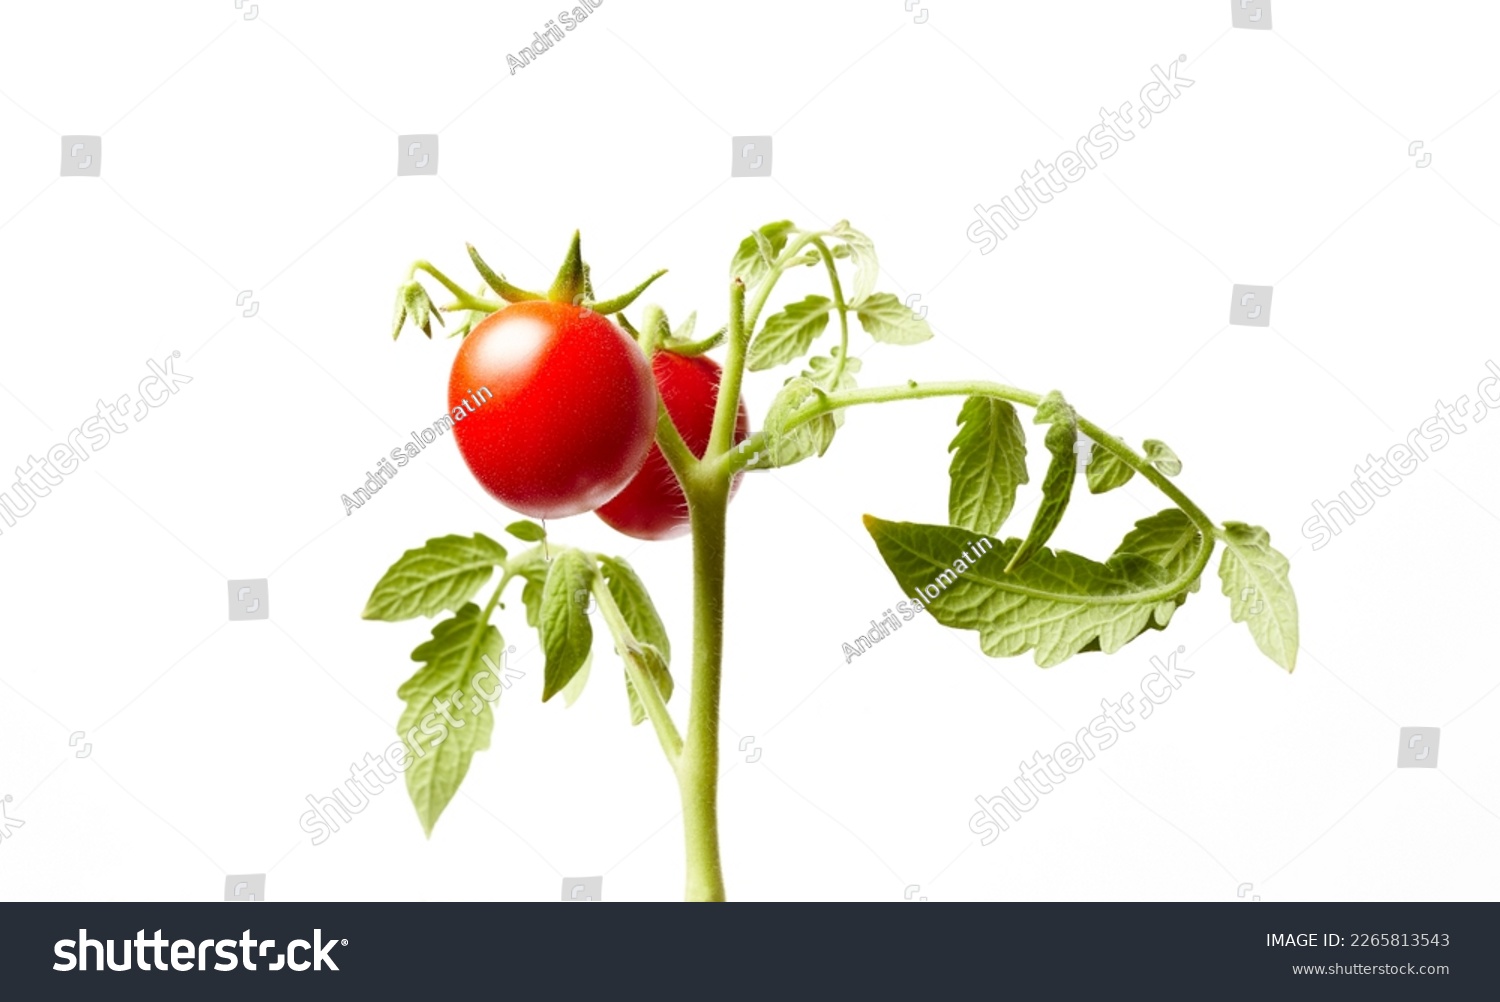 Tomato plant isolated on white background. Green seedling of fresh ripe red tomatoes, close up #2265813543